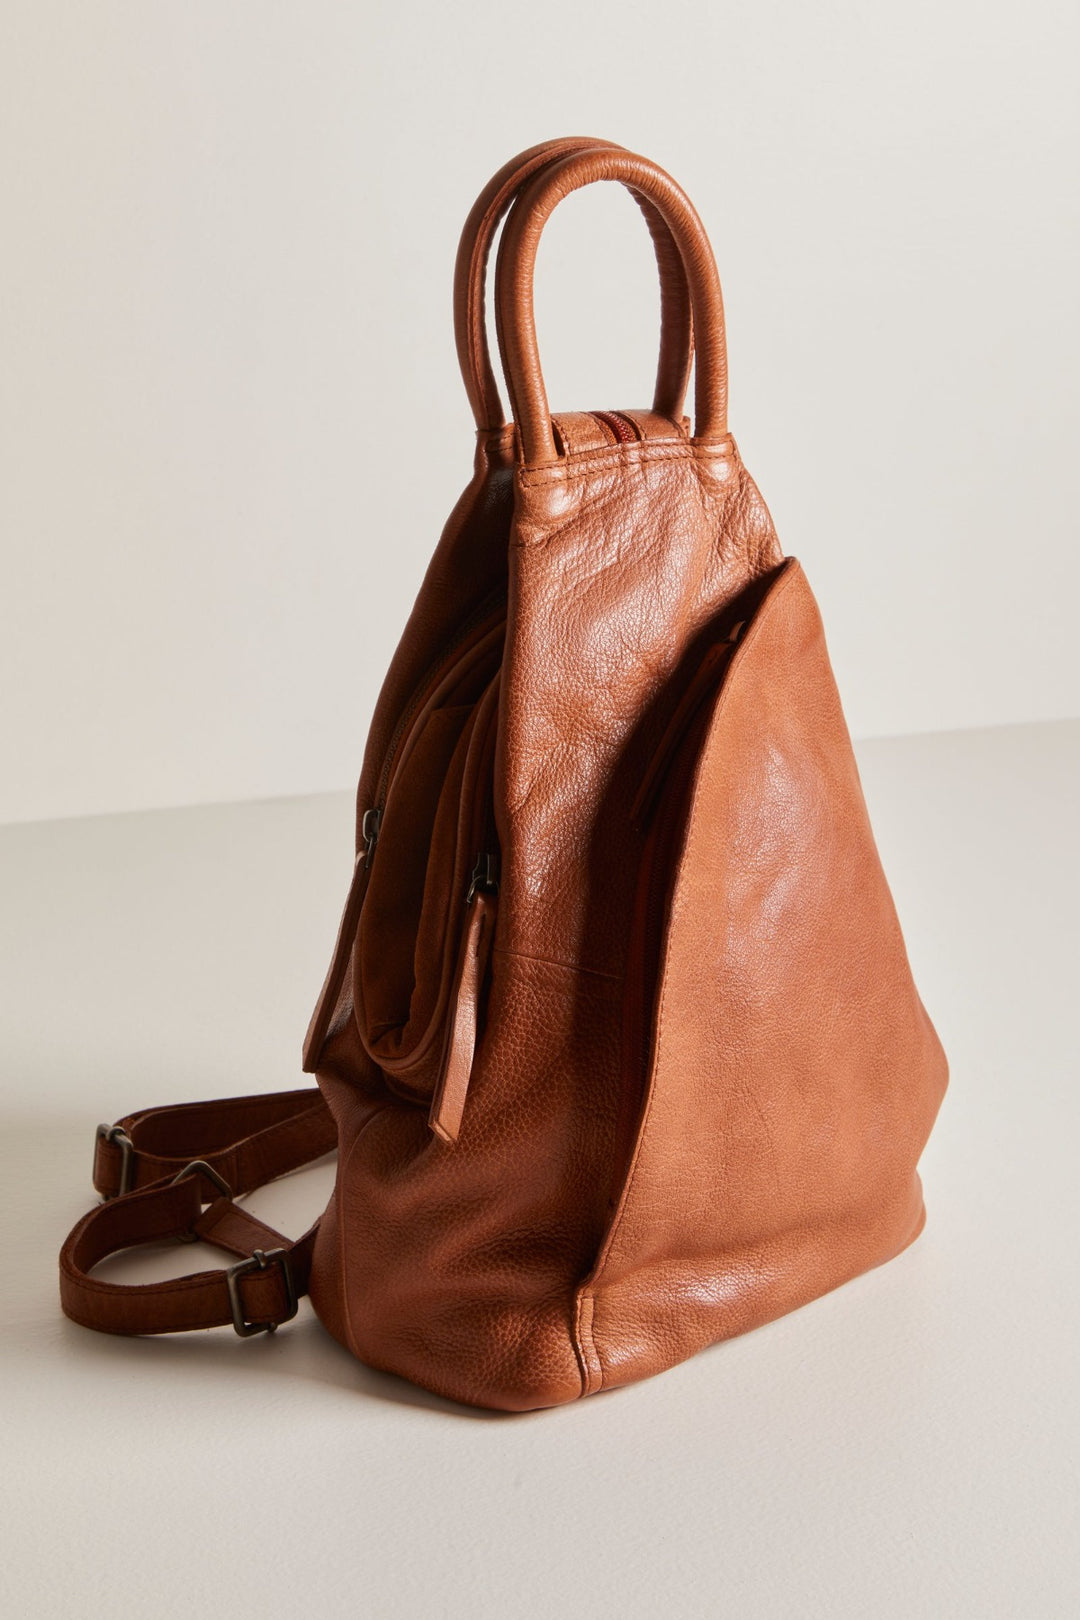 Make a statement wherever you go with the Free People WTF Soho Convertible Leather Bag! This bag is like a chameleon, quickly converting from a stylish sling bag to an edgy backpack with adjustable straps and zipper closures. And you'll look cool no matter how you wear it. Your style just leveled up!